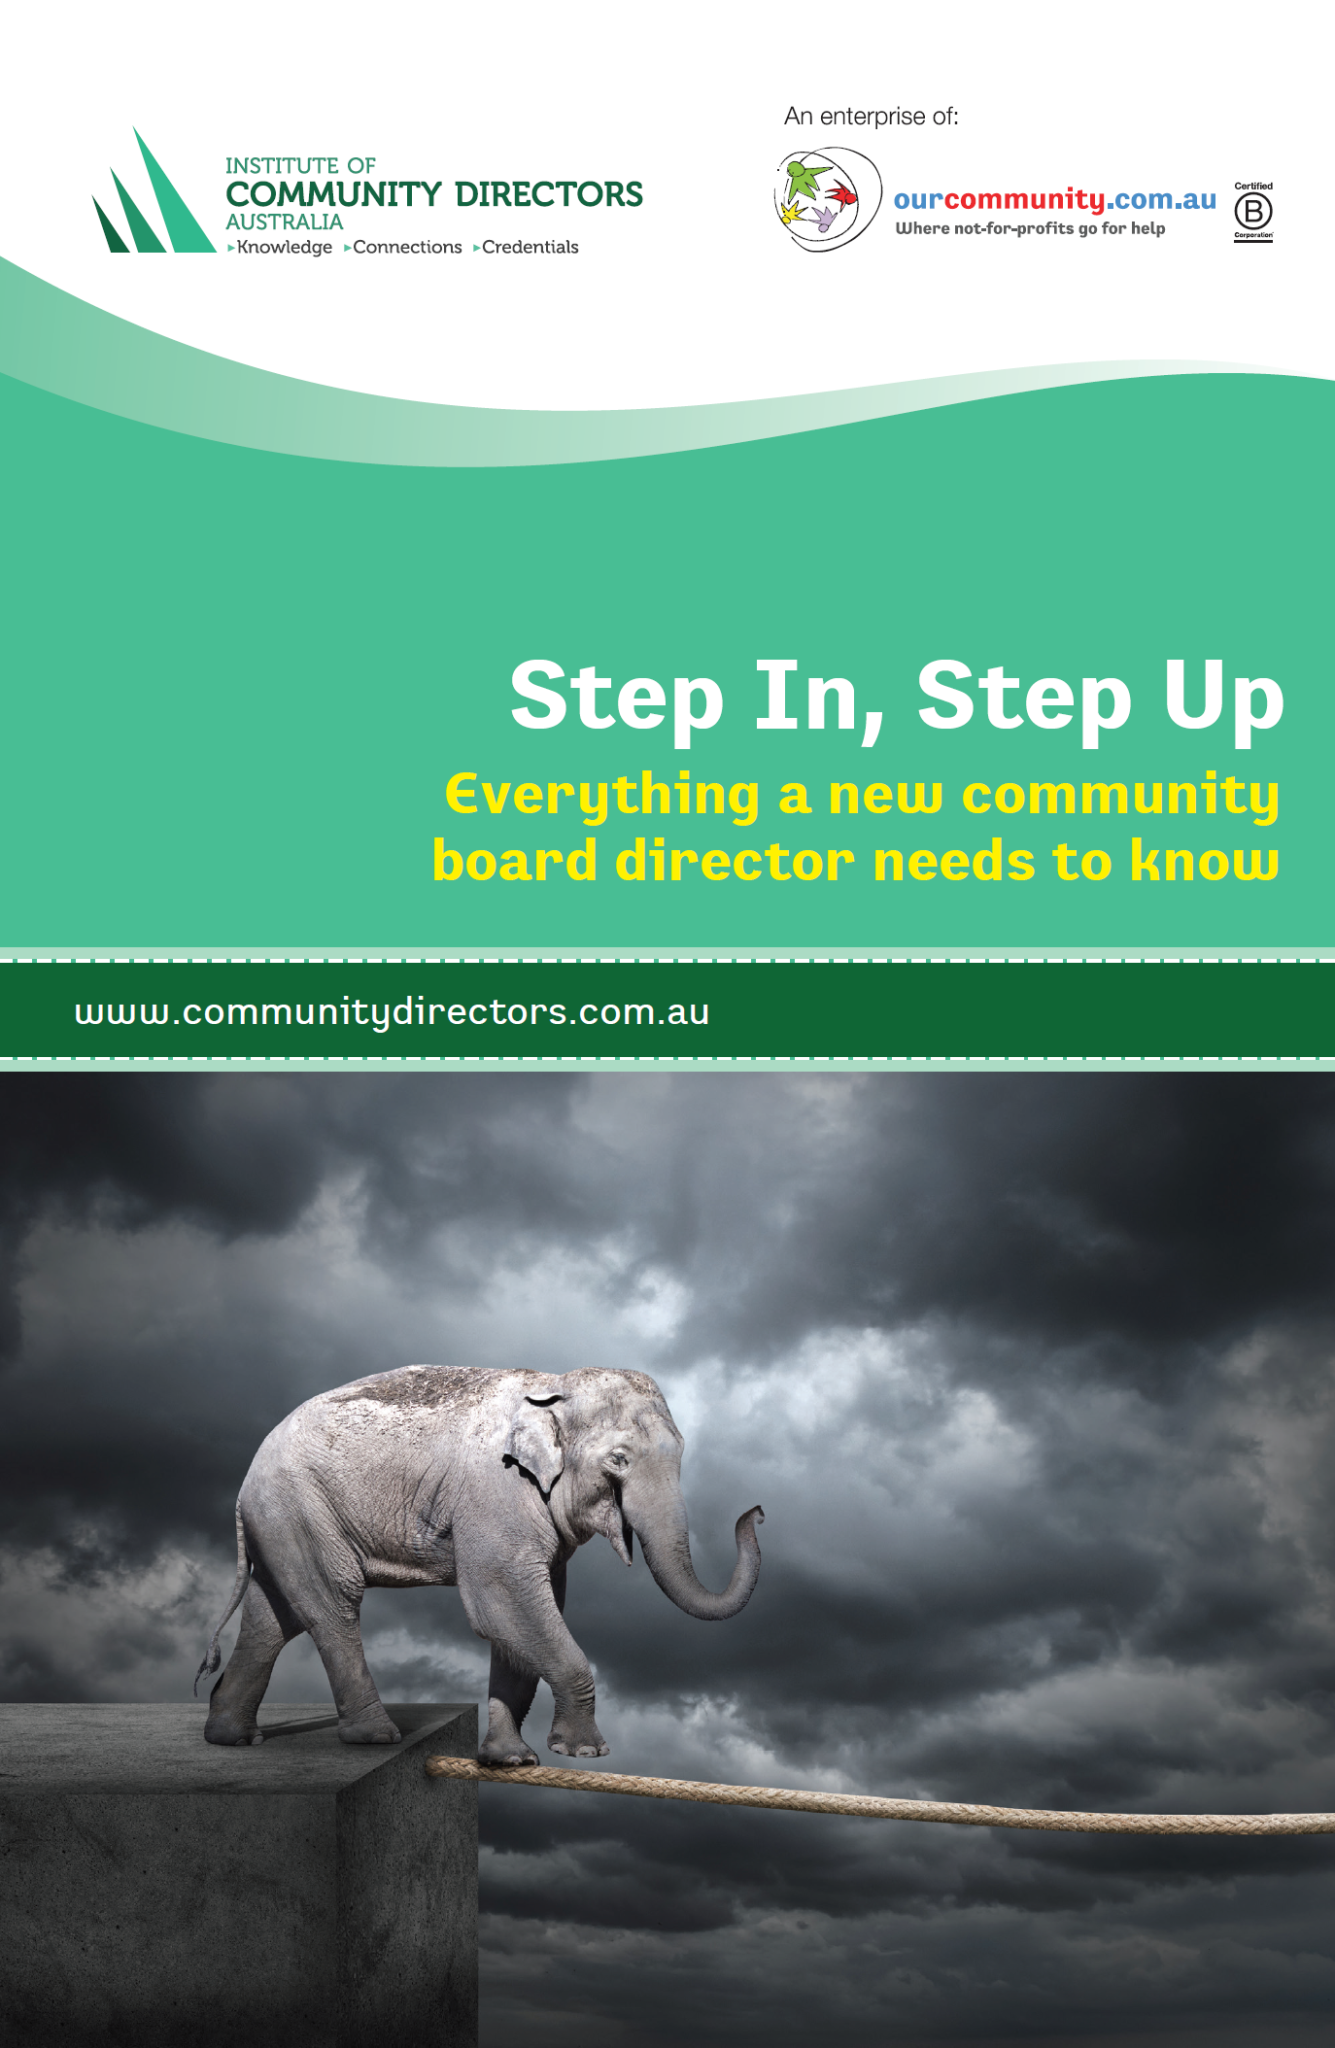 Step In, Step Up: Everything a new community board director needs to know